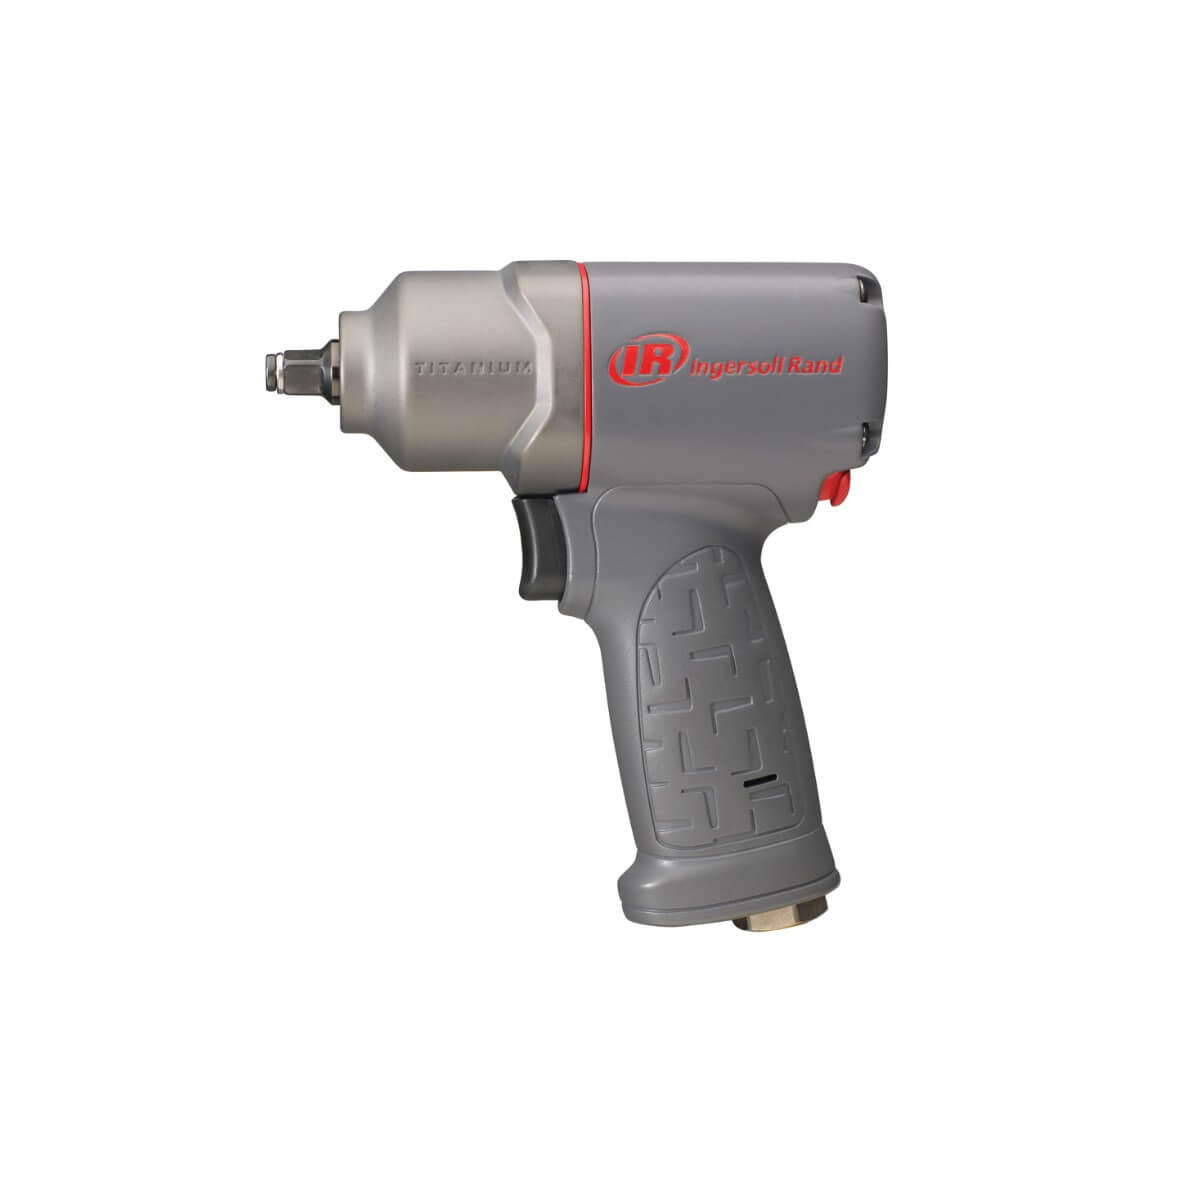 Ingersoll Rand 2135QXPA- 1/2" Titanium Impact Wrench - wise-line-tools